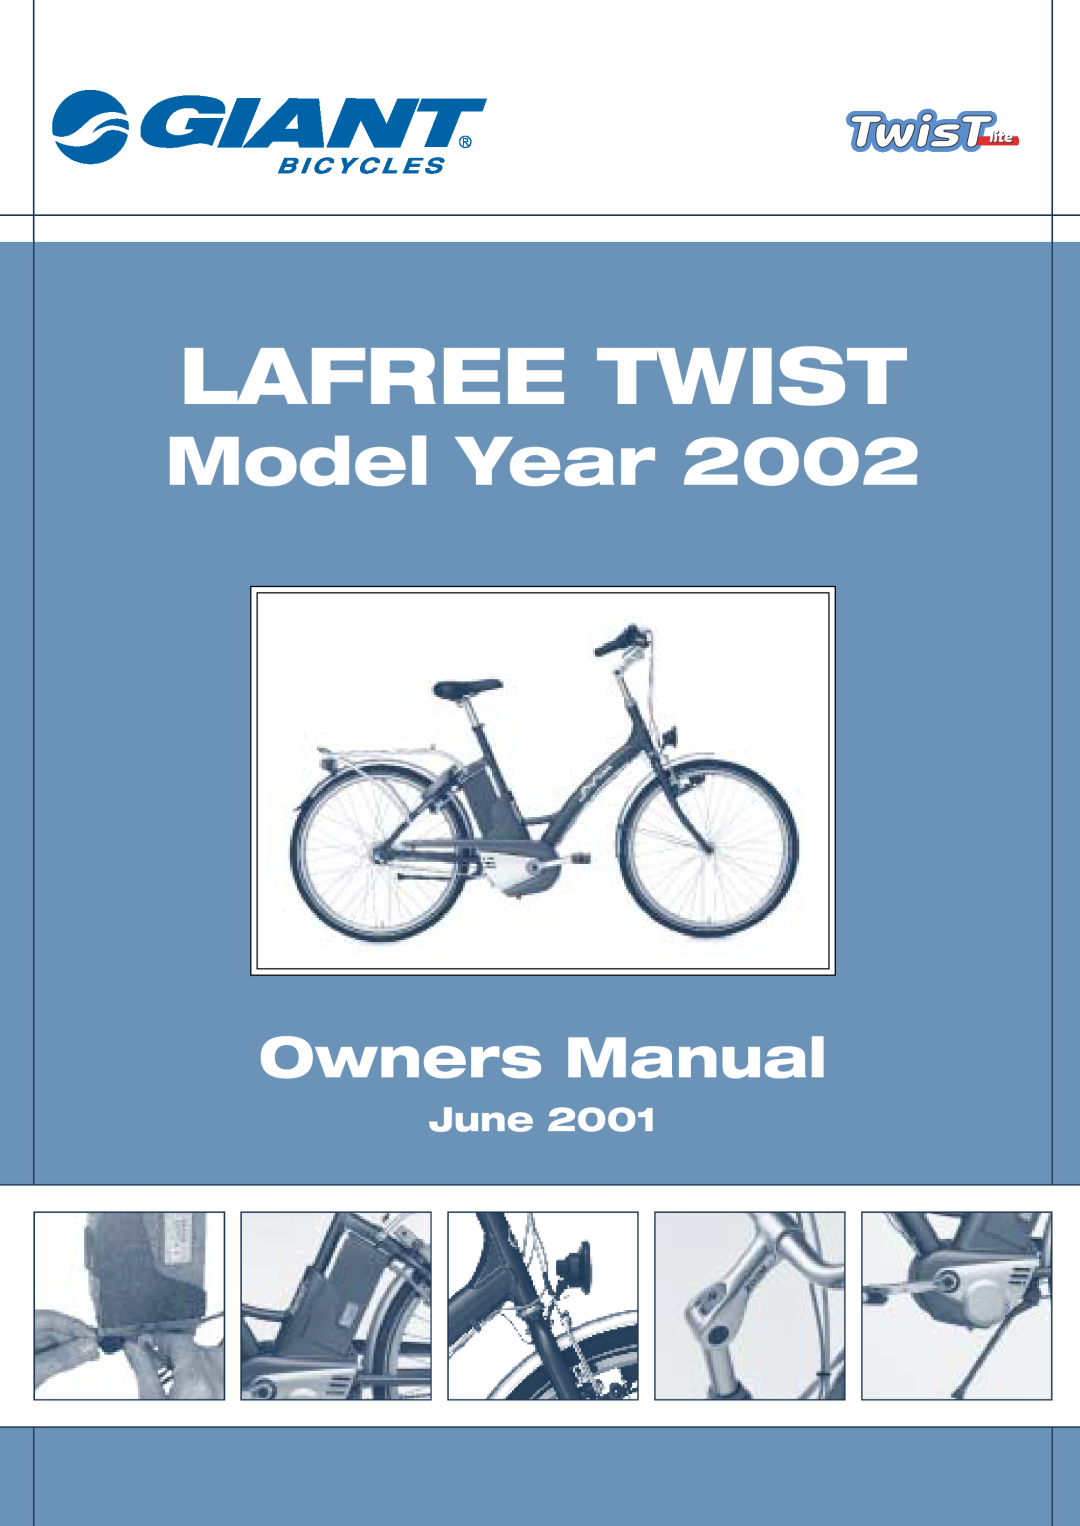 Giant 2002 Motorized Bicycle owner manual June, Lafree Twist, Model Year, Owners Manual 